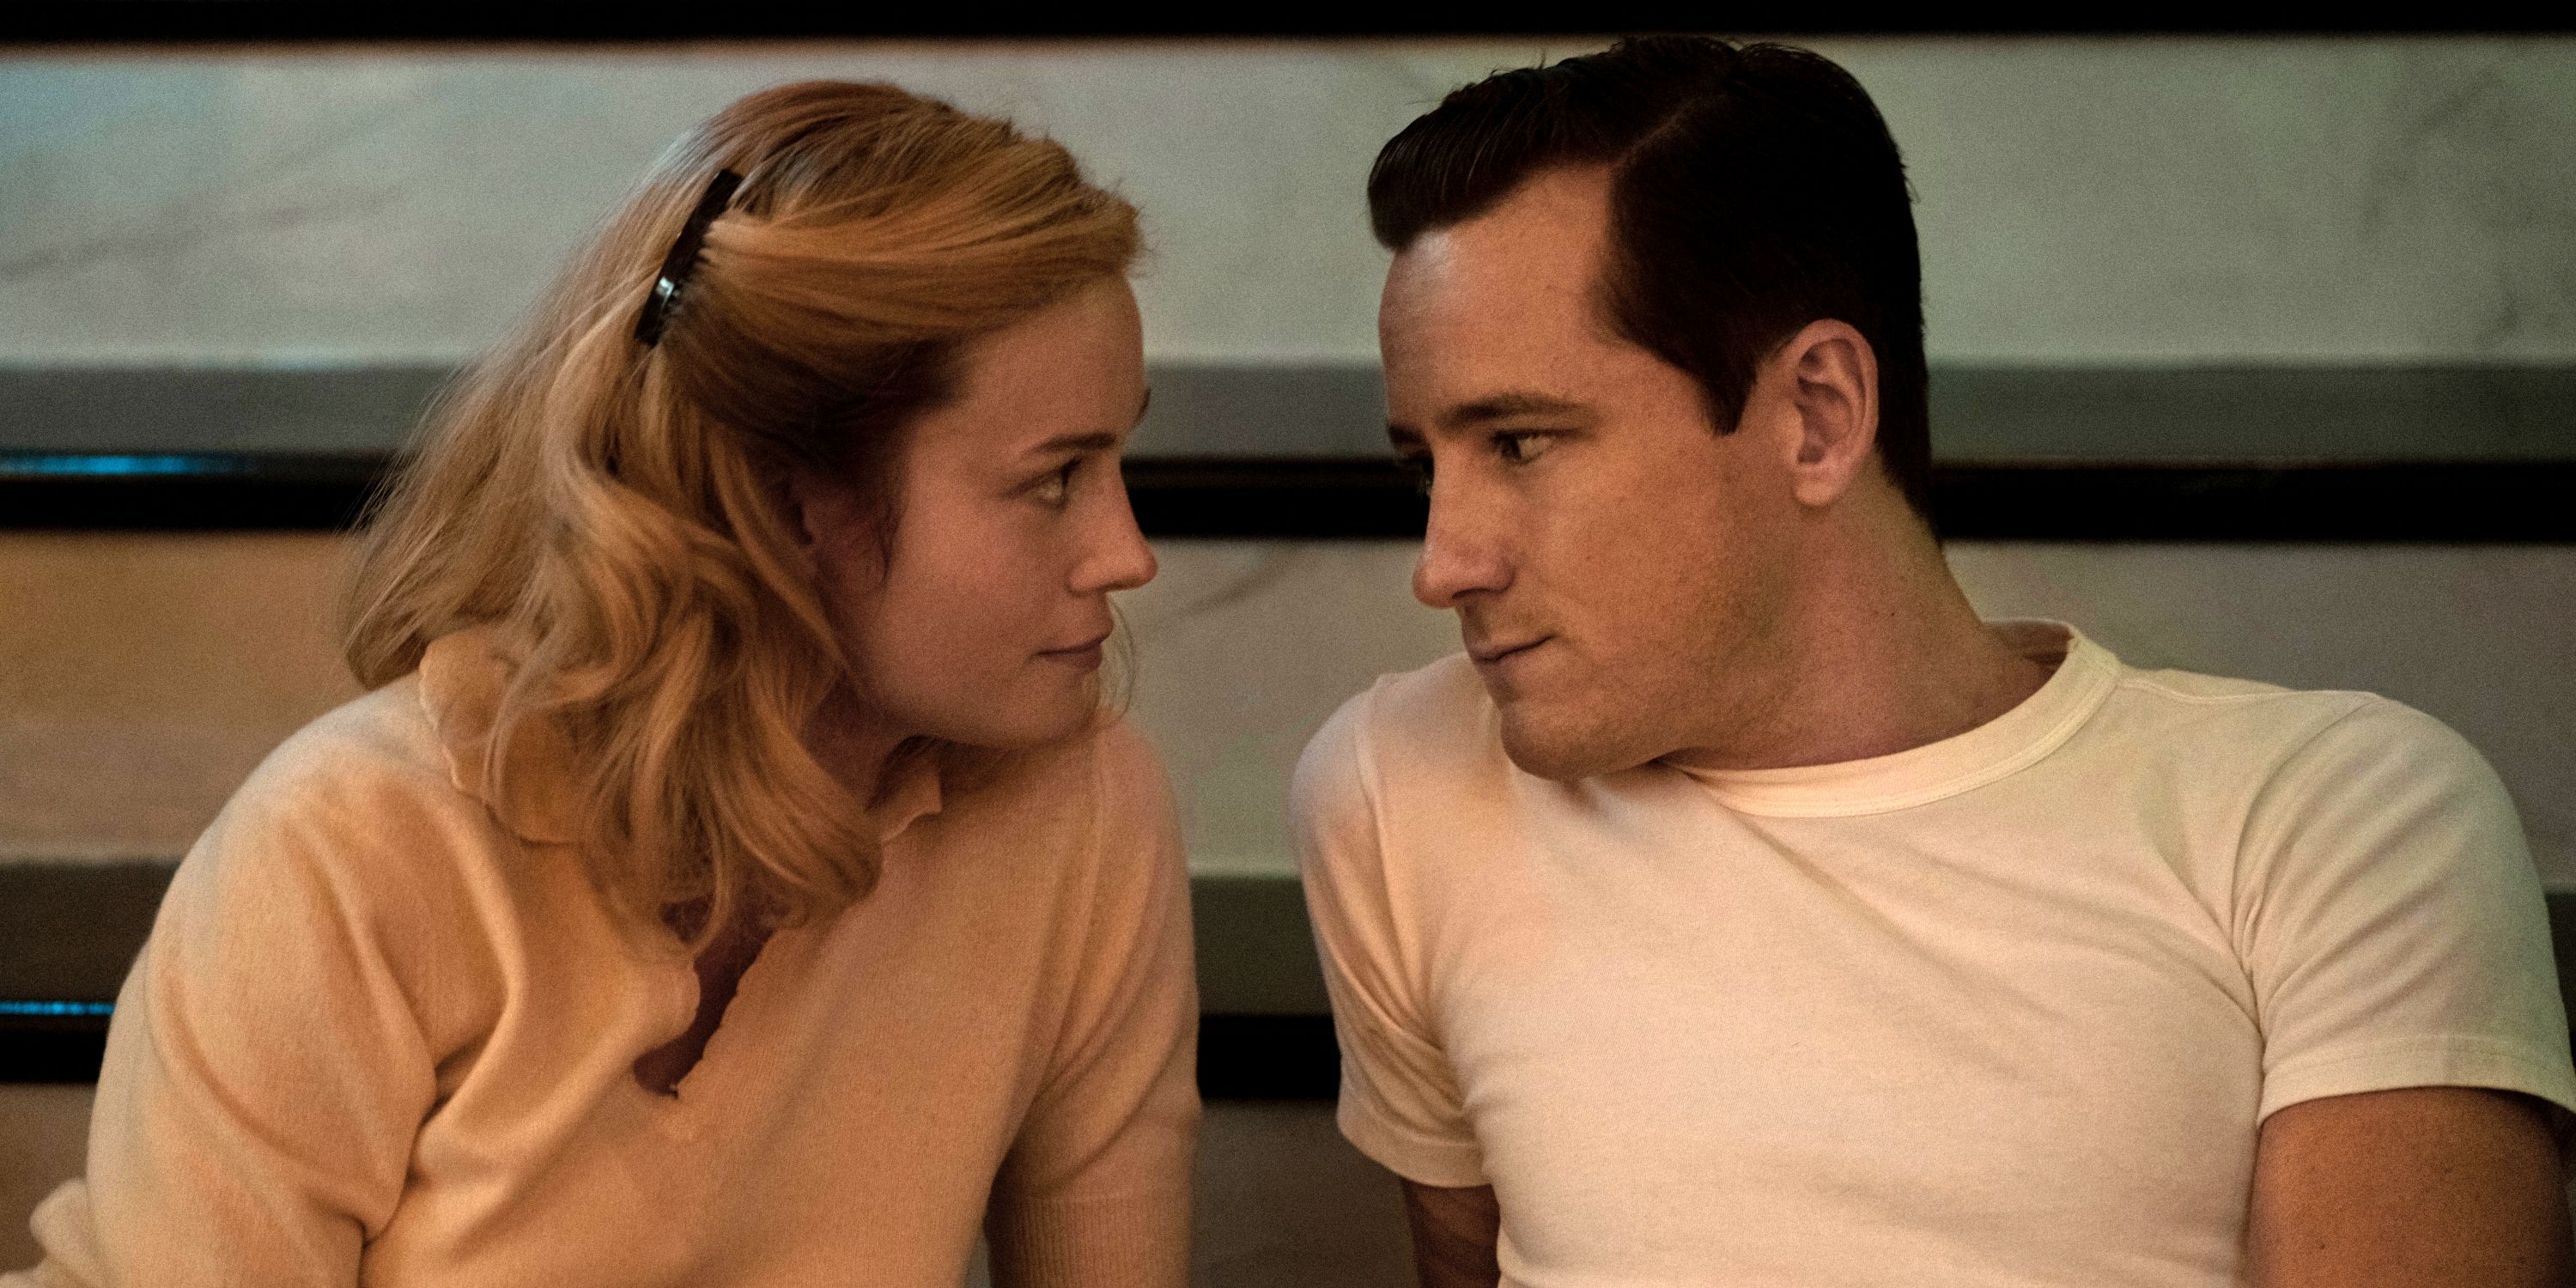 Brie Larson as Elizabeth Zott and Lewis Pullman as Calvin Evans in Episode 2 of Lessons in Chemistry